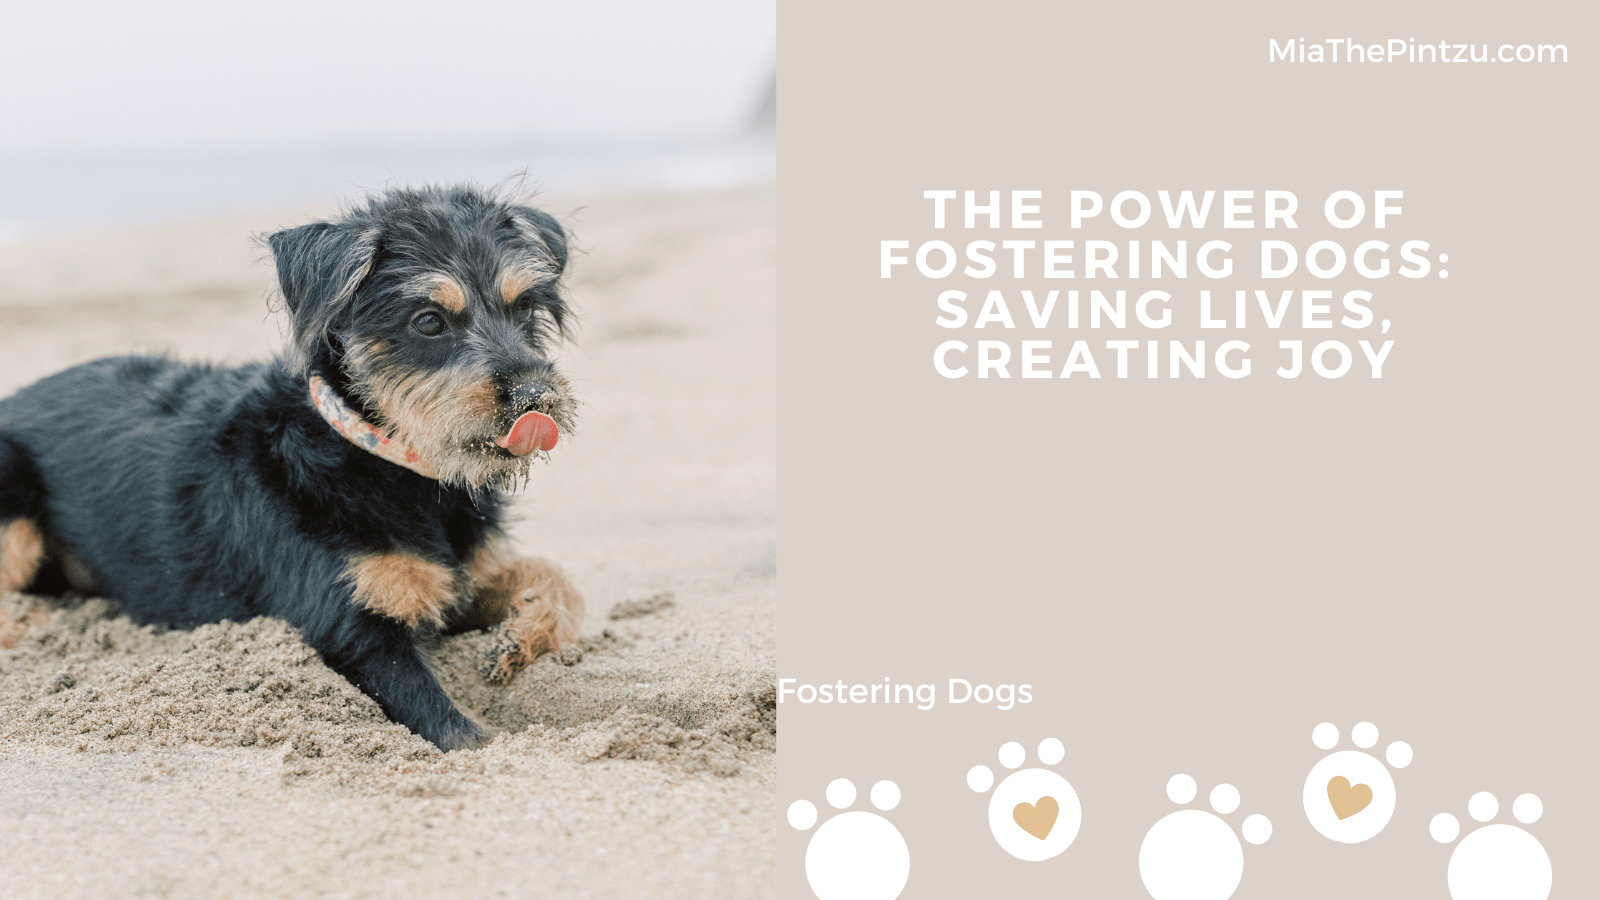 The Power of Fostering Dogs: Saving Lives